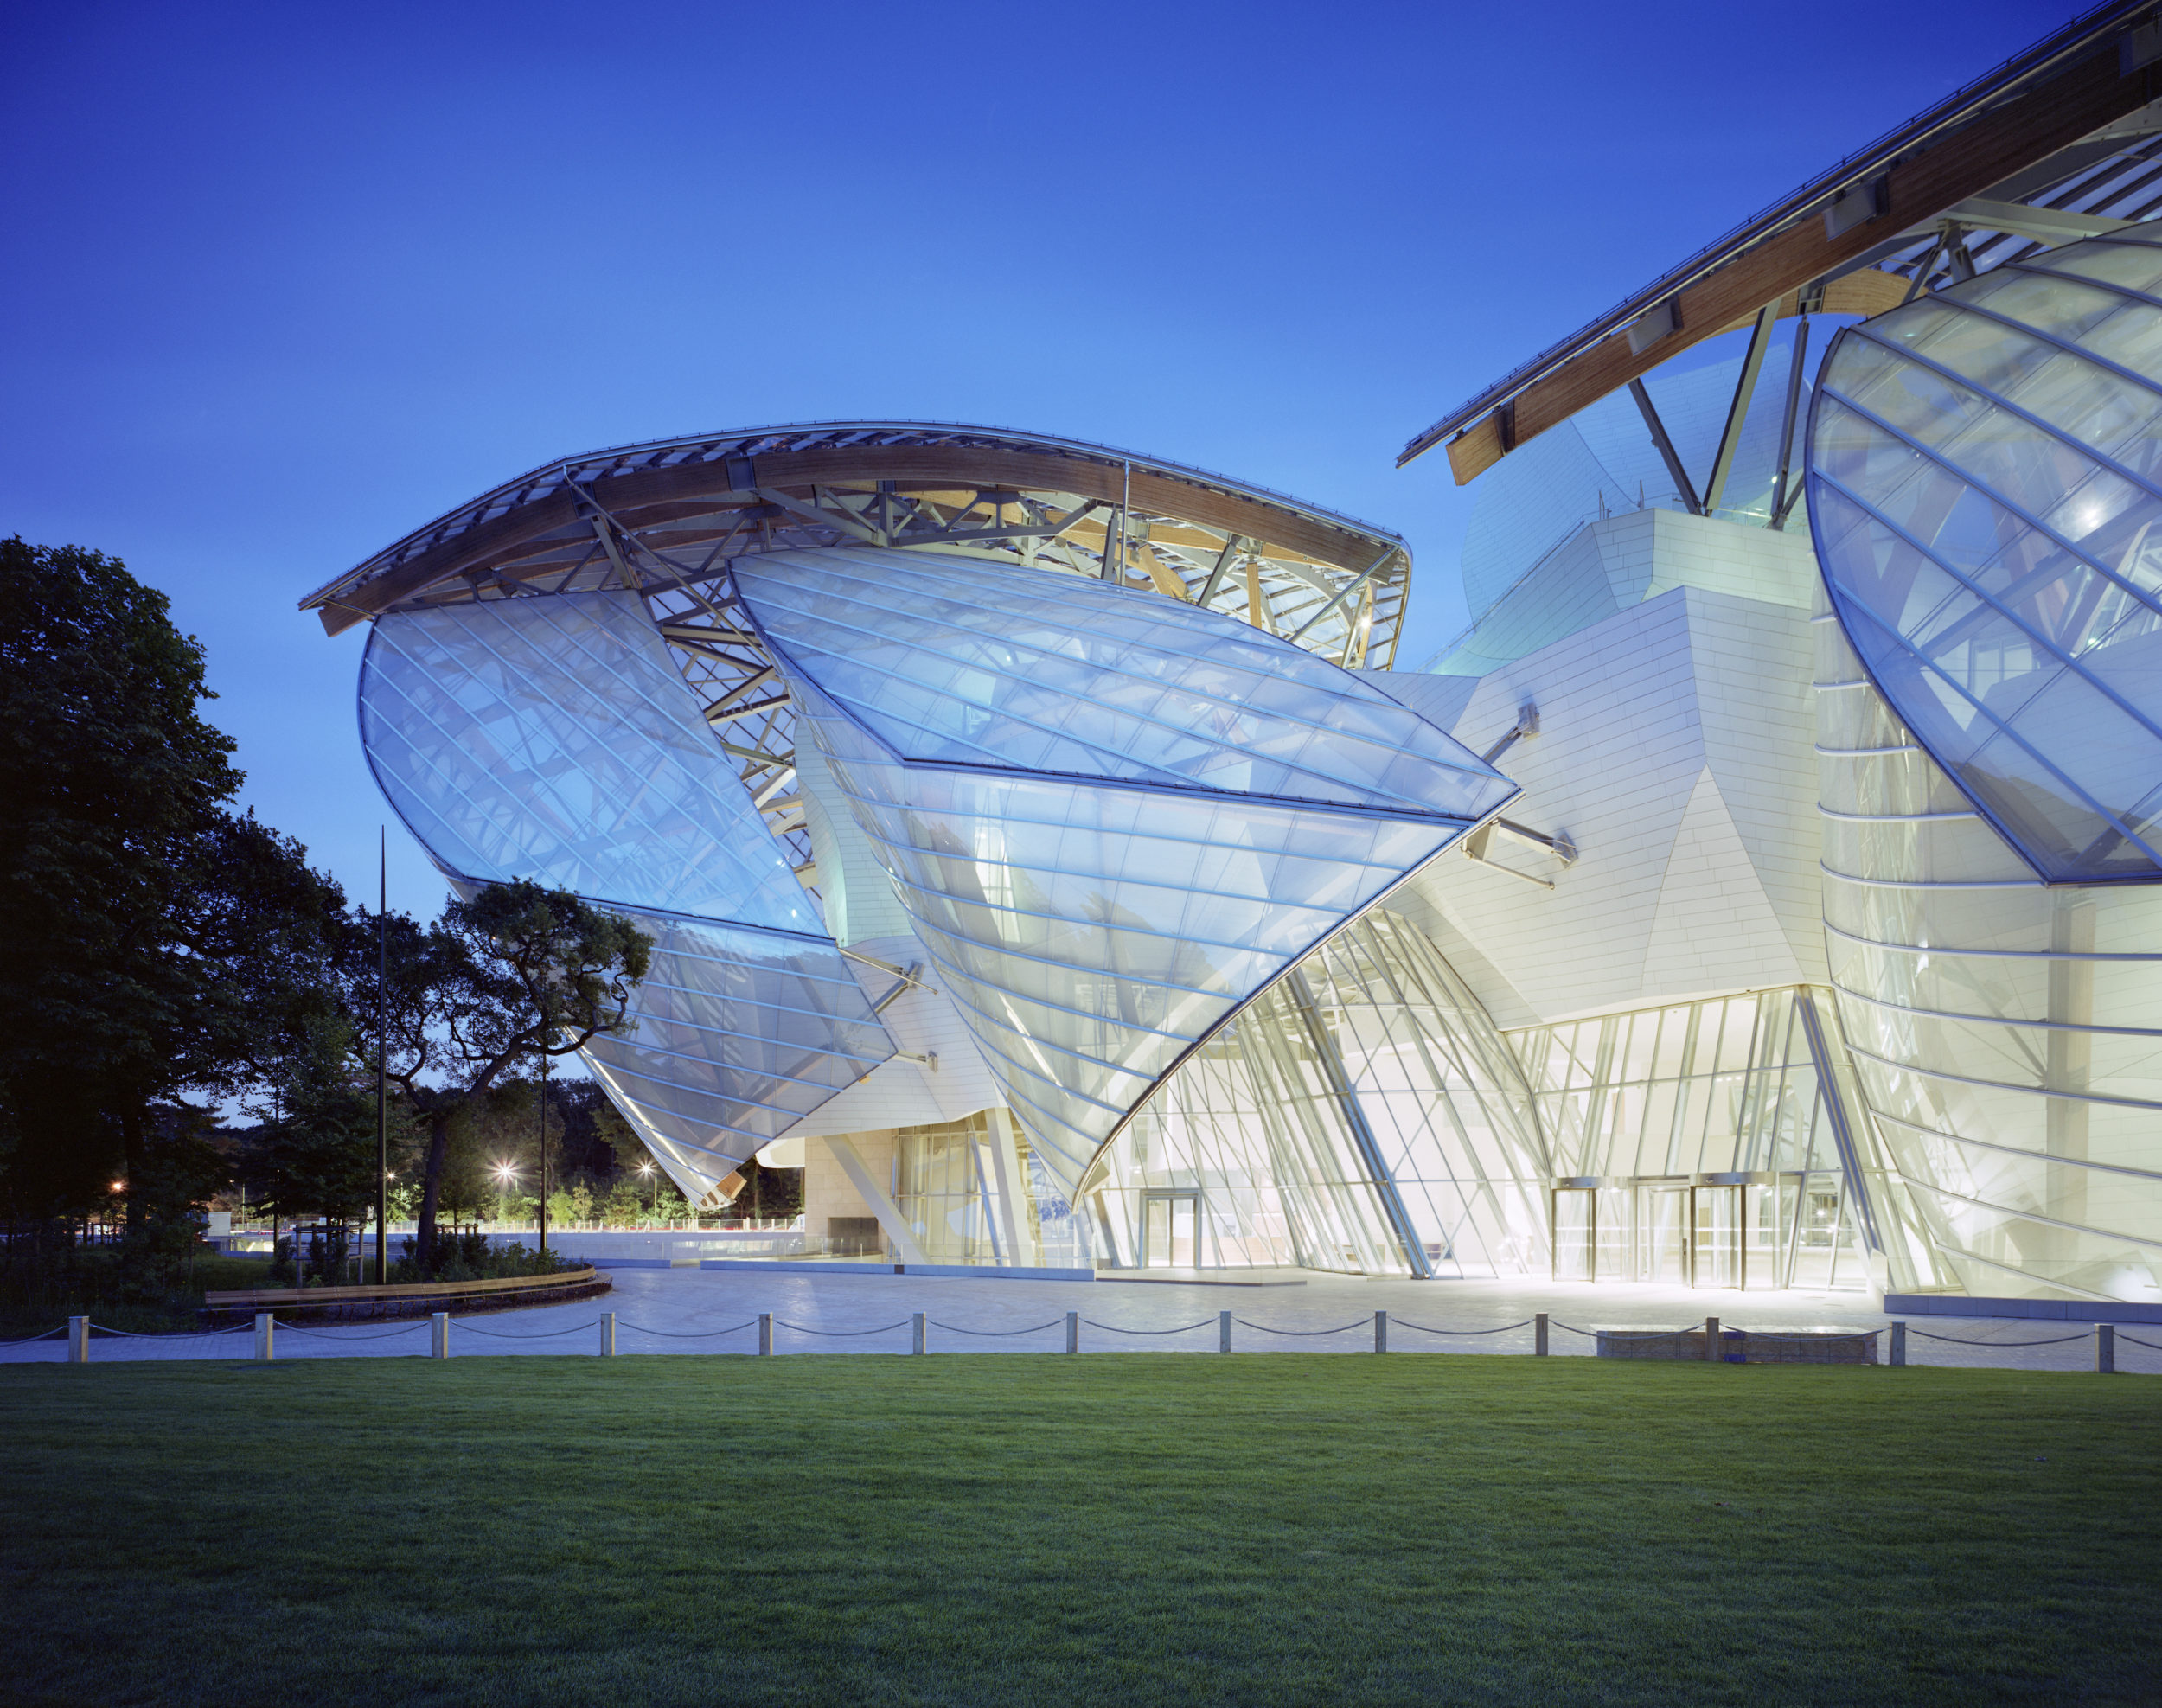 The Fondation Louis Vuitton with your family